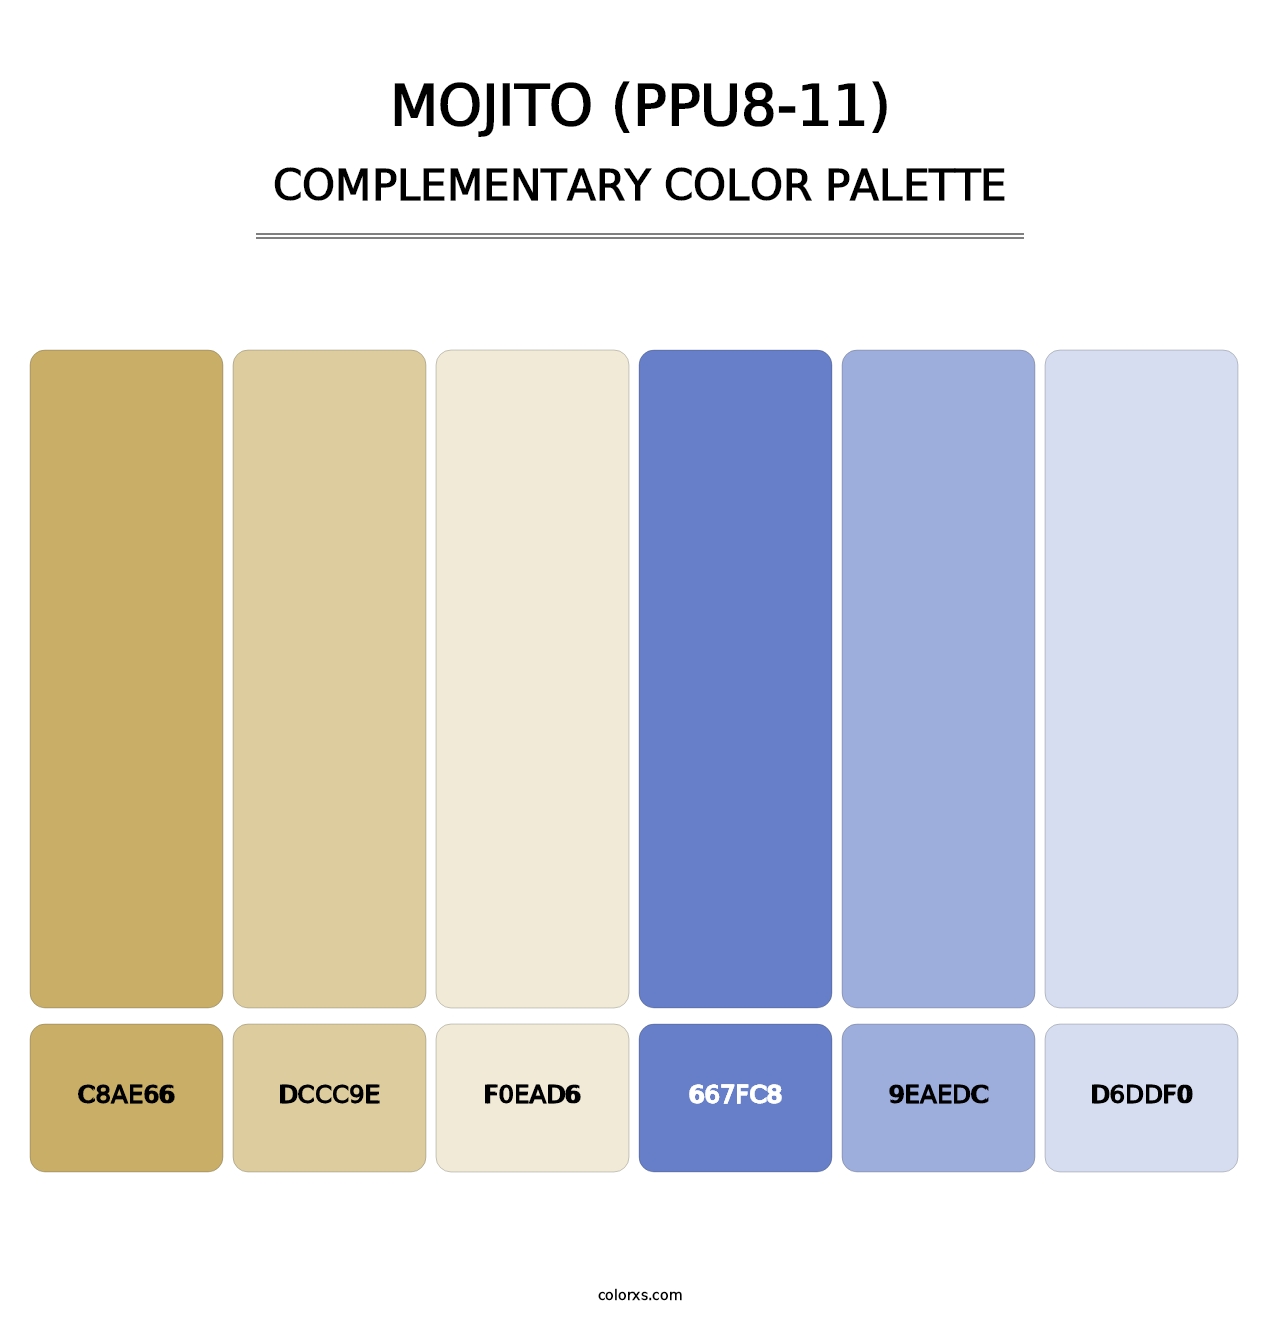 Mojito (PPU8-11) - Complementary Color Palette